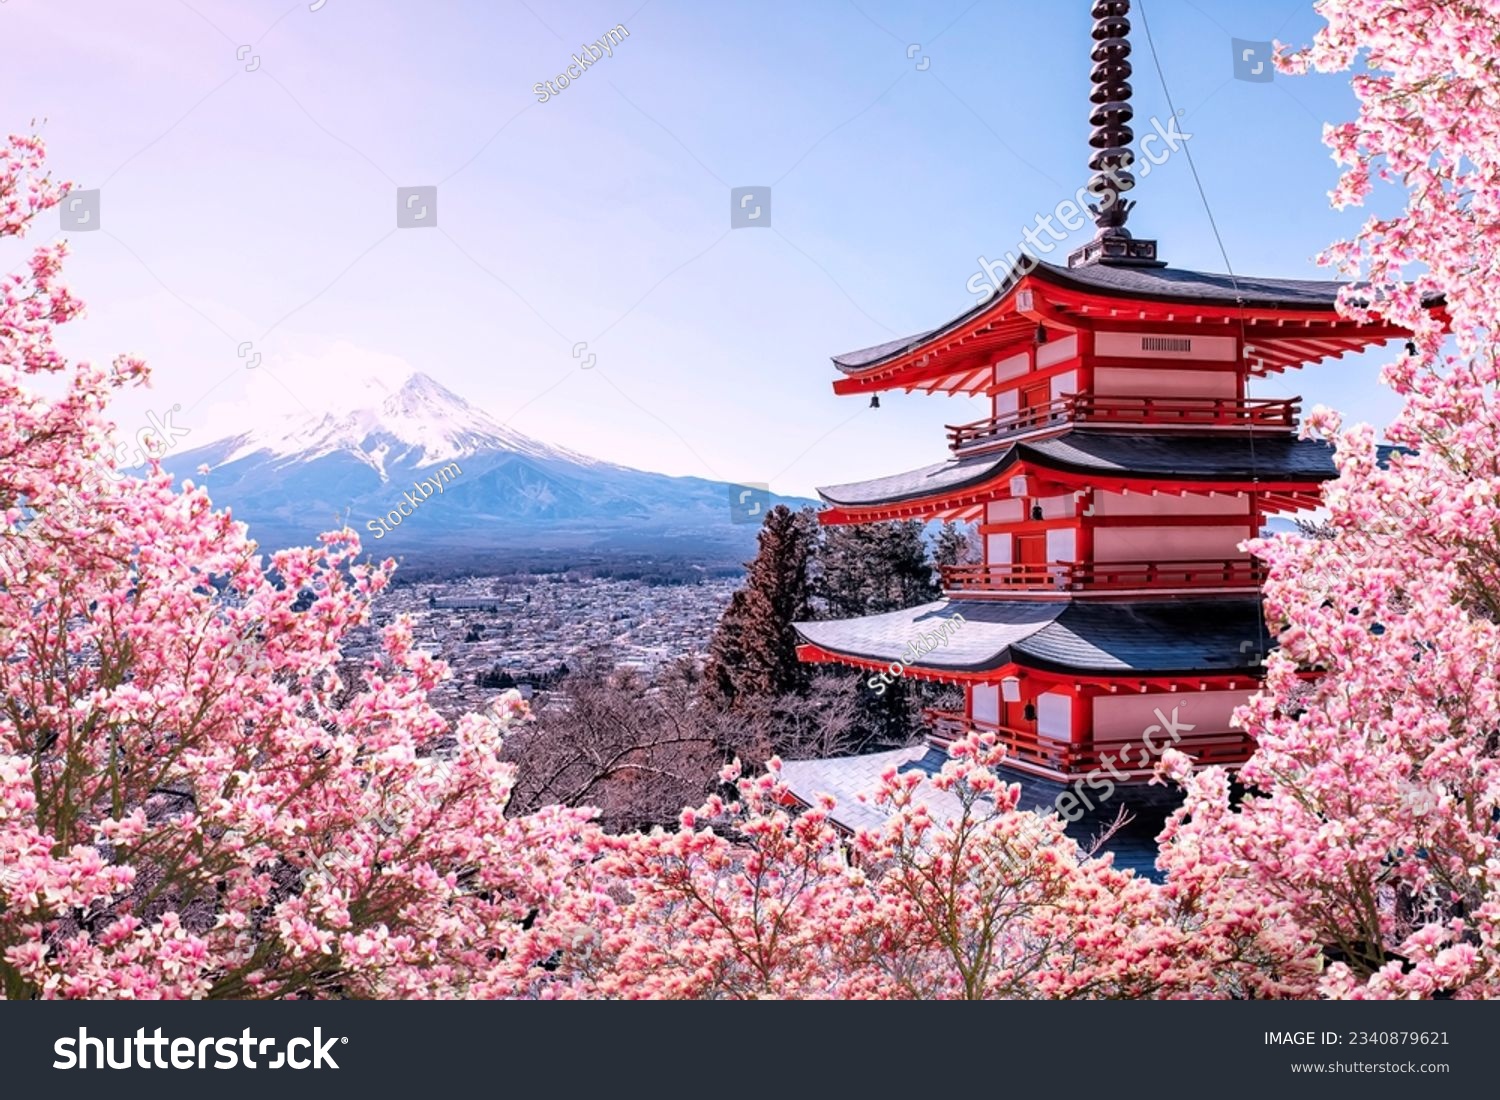 A famous place in Japan with Chureito Pagoda and Mount Fuji during the spring	 #2340879621